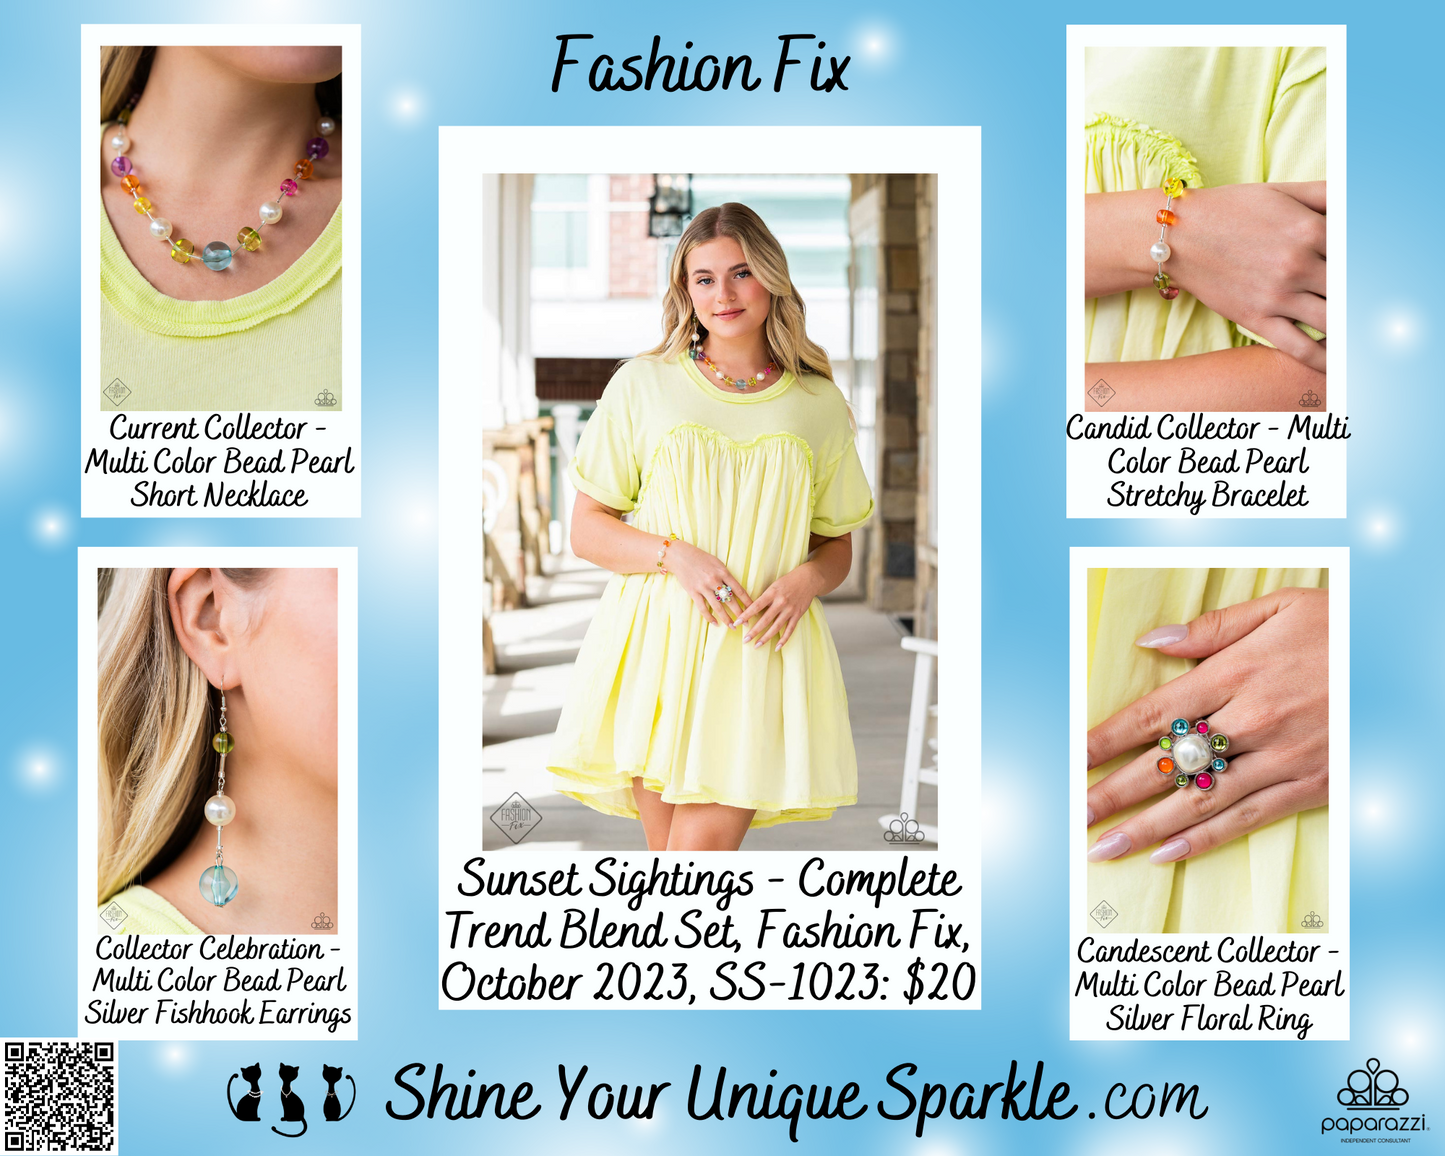 Current Collector - Multi Color Bead Pearl Short Necklace - Fashion Fix